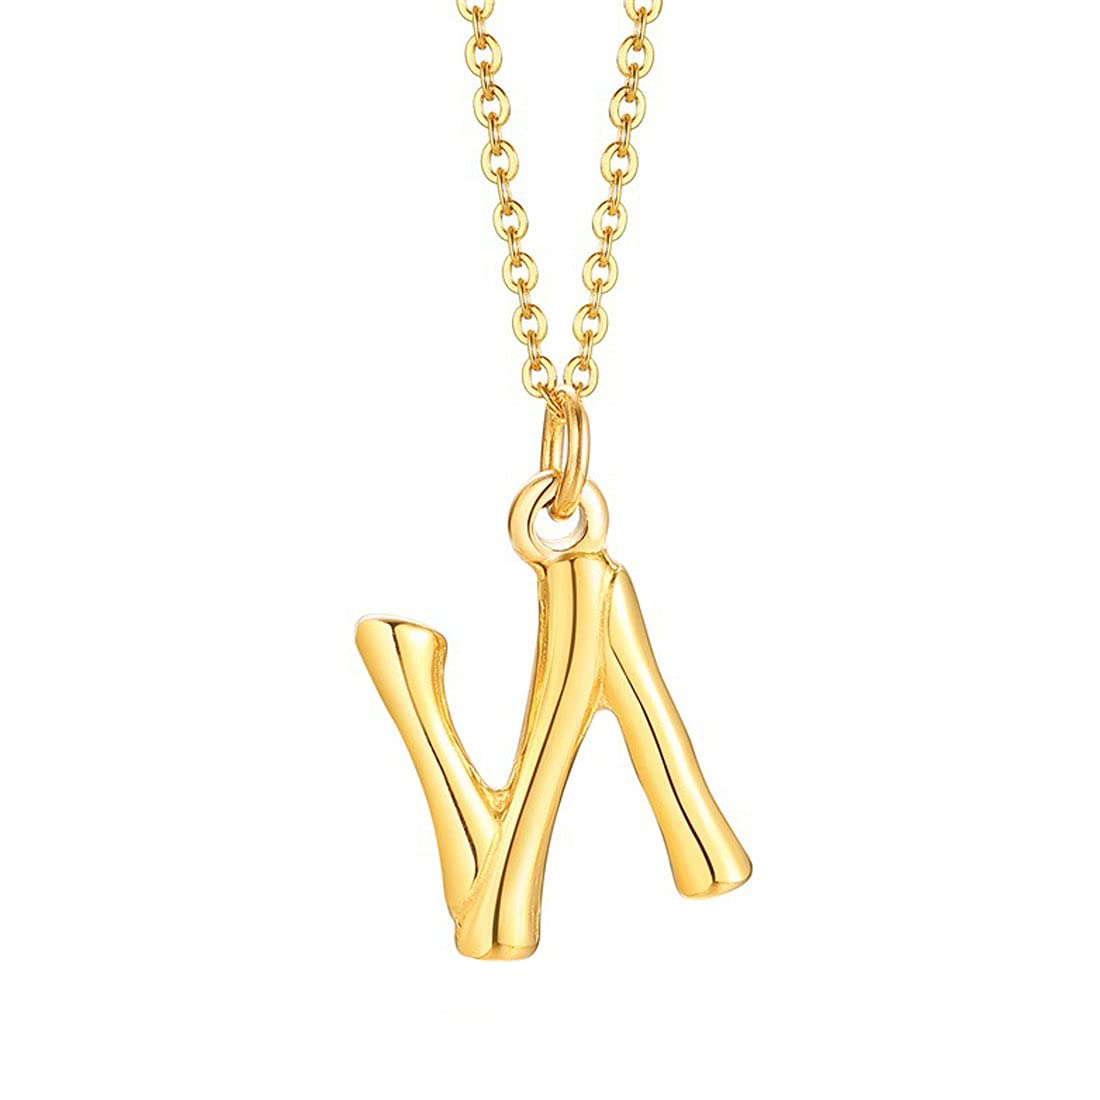 Yellow Chimes Latest Fashion Stainless Steel 18K Gold Plated Initial Pendant with Alphabet N for Women and Girls, Medium (Model: YCFJPD-N363INI-GL)